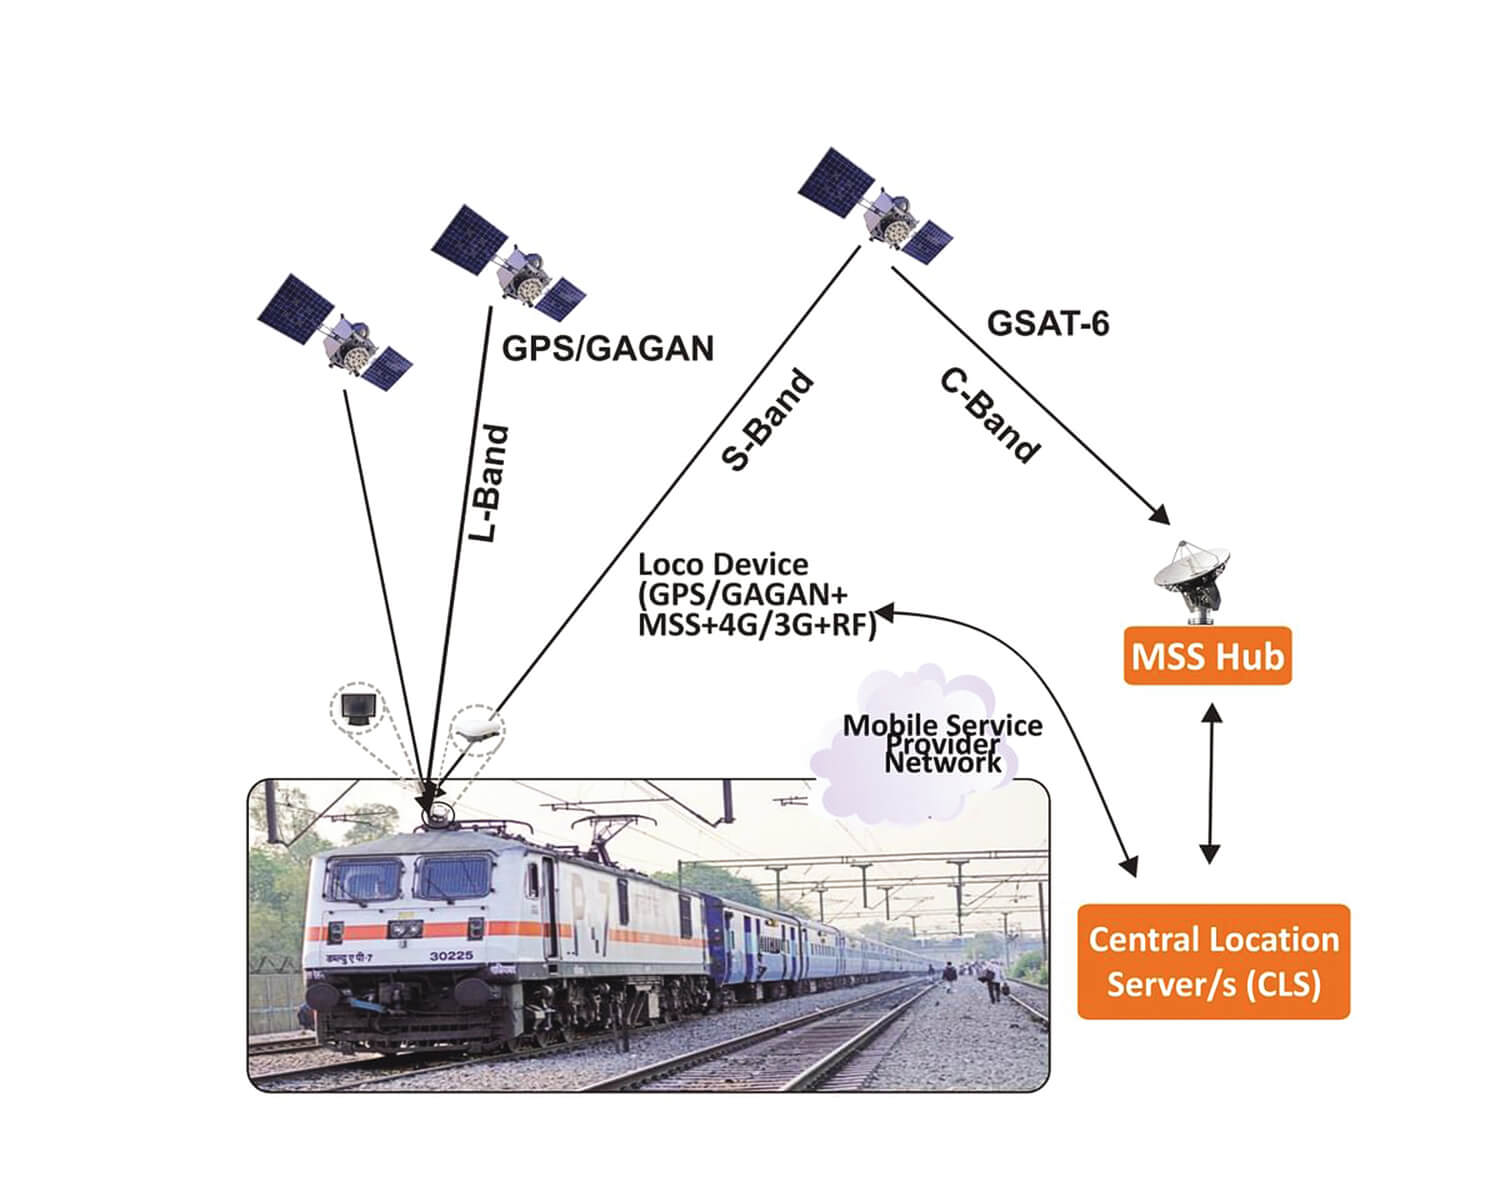 BEL commissions real time train information system for Indian railways